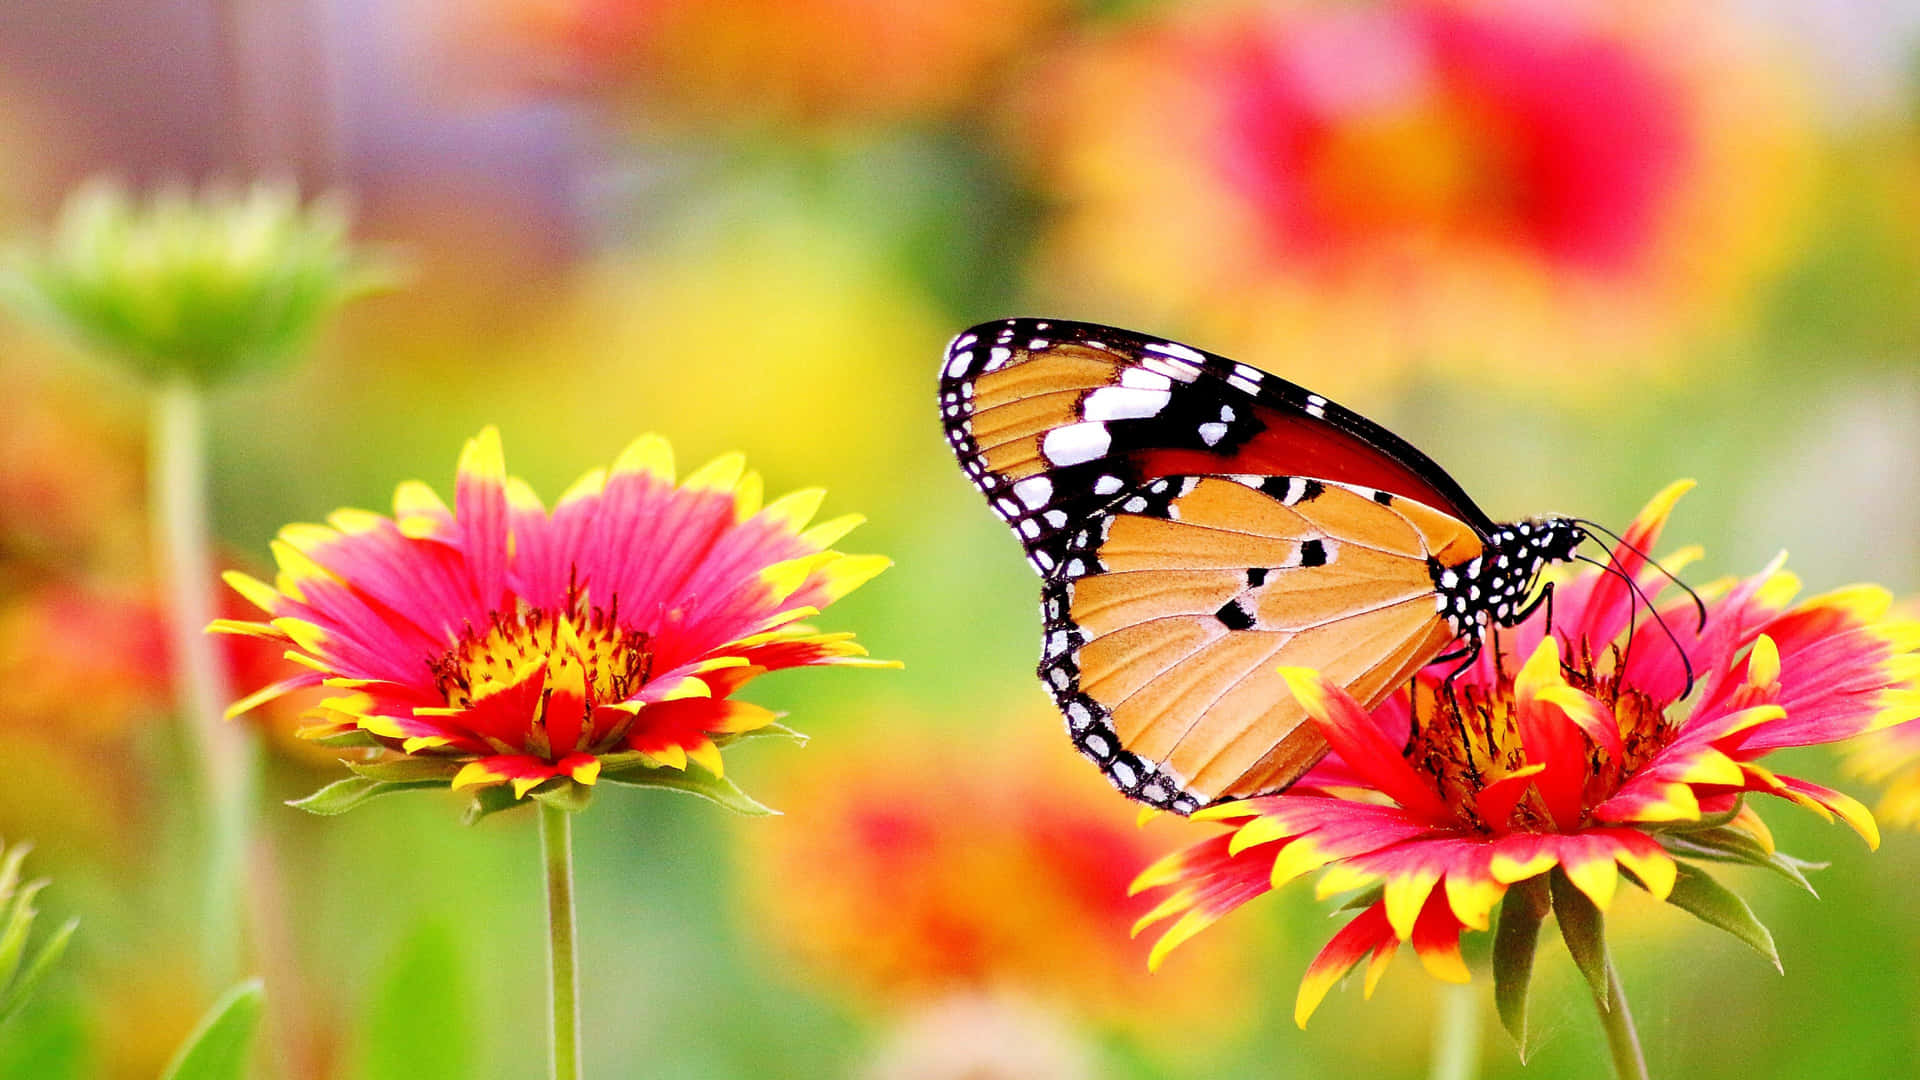 Stunning 4k Butterfly Displaying Vibrant Colors Wallpaper